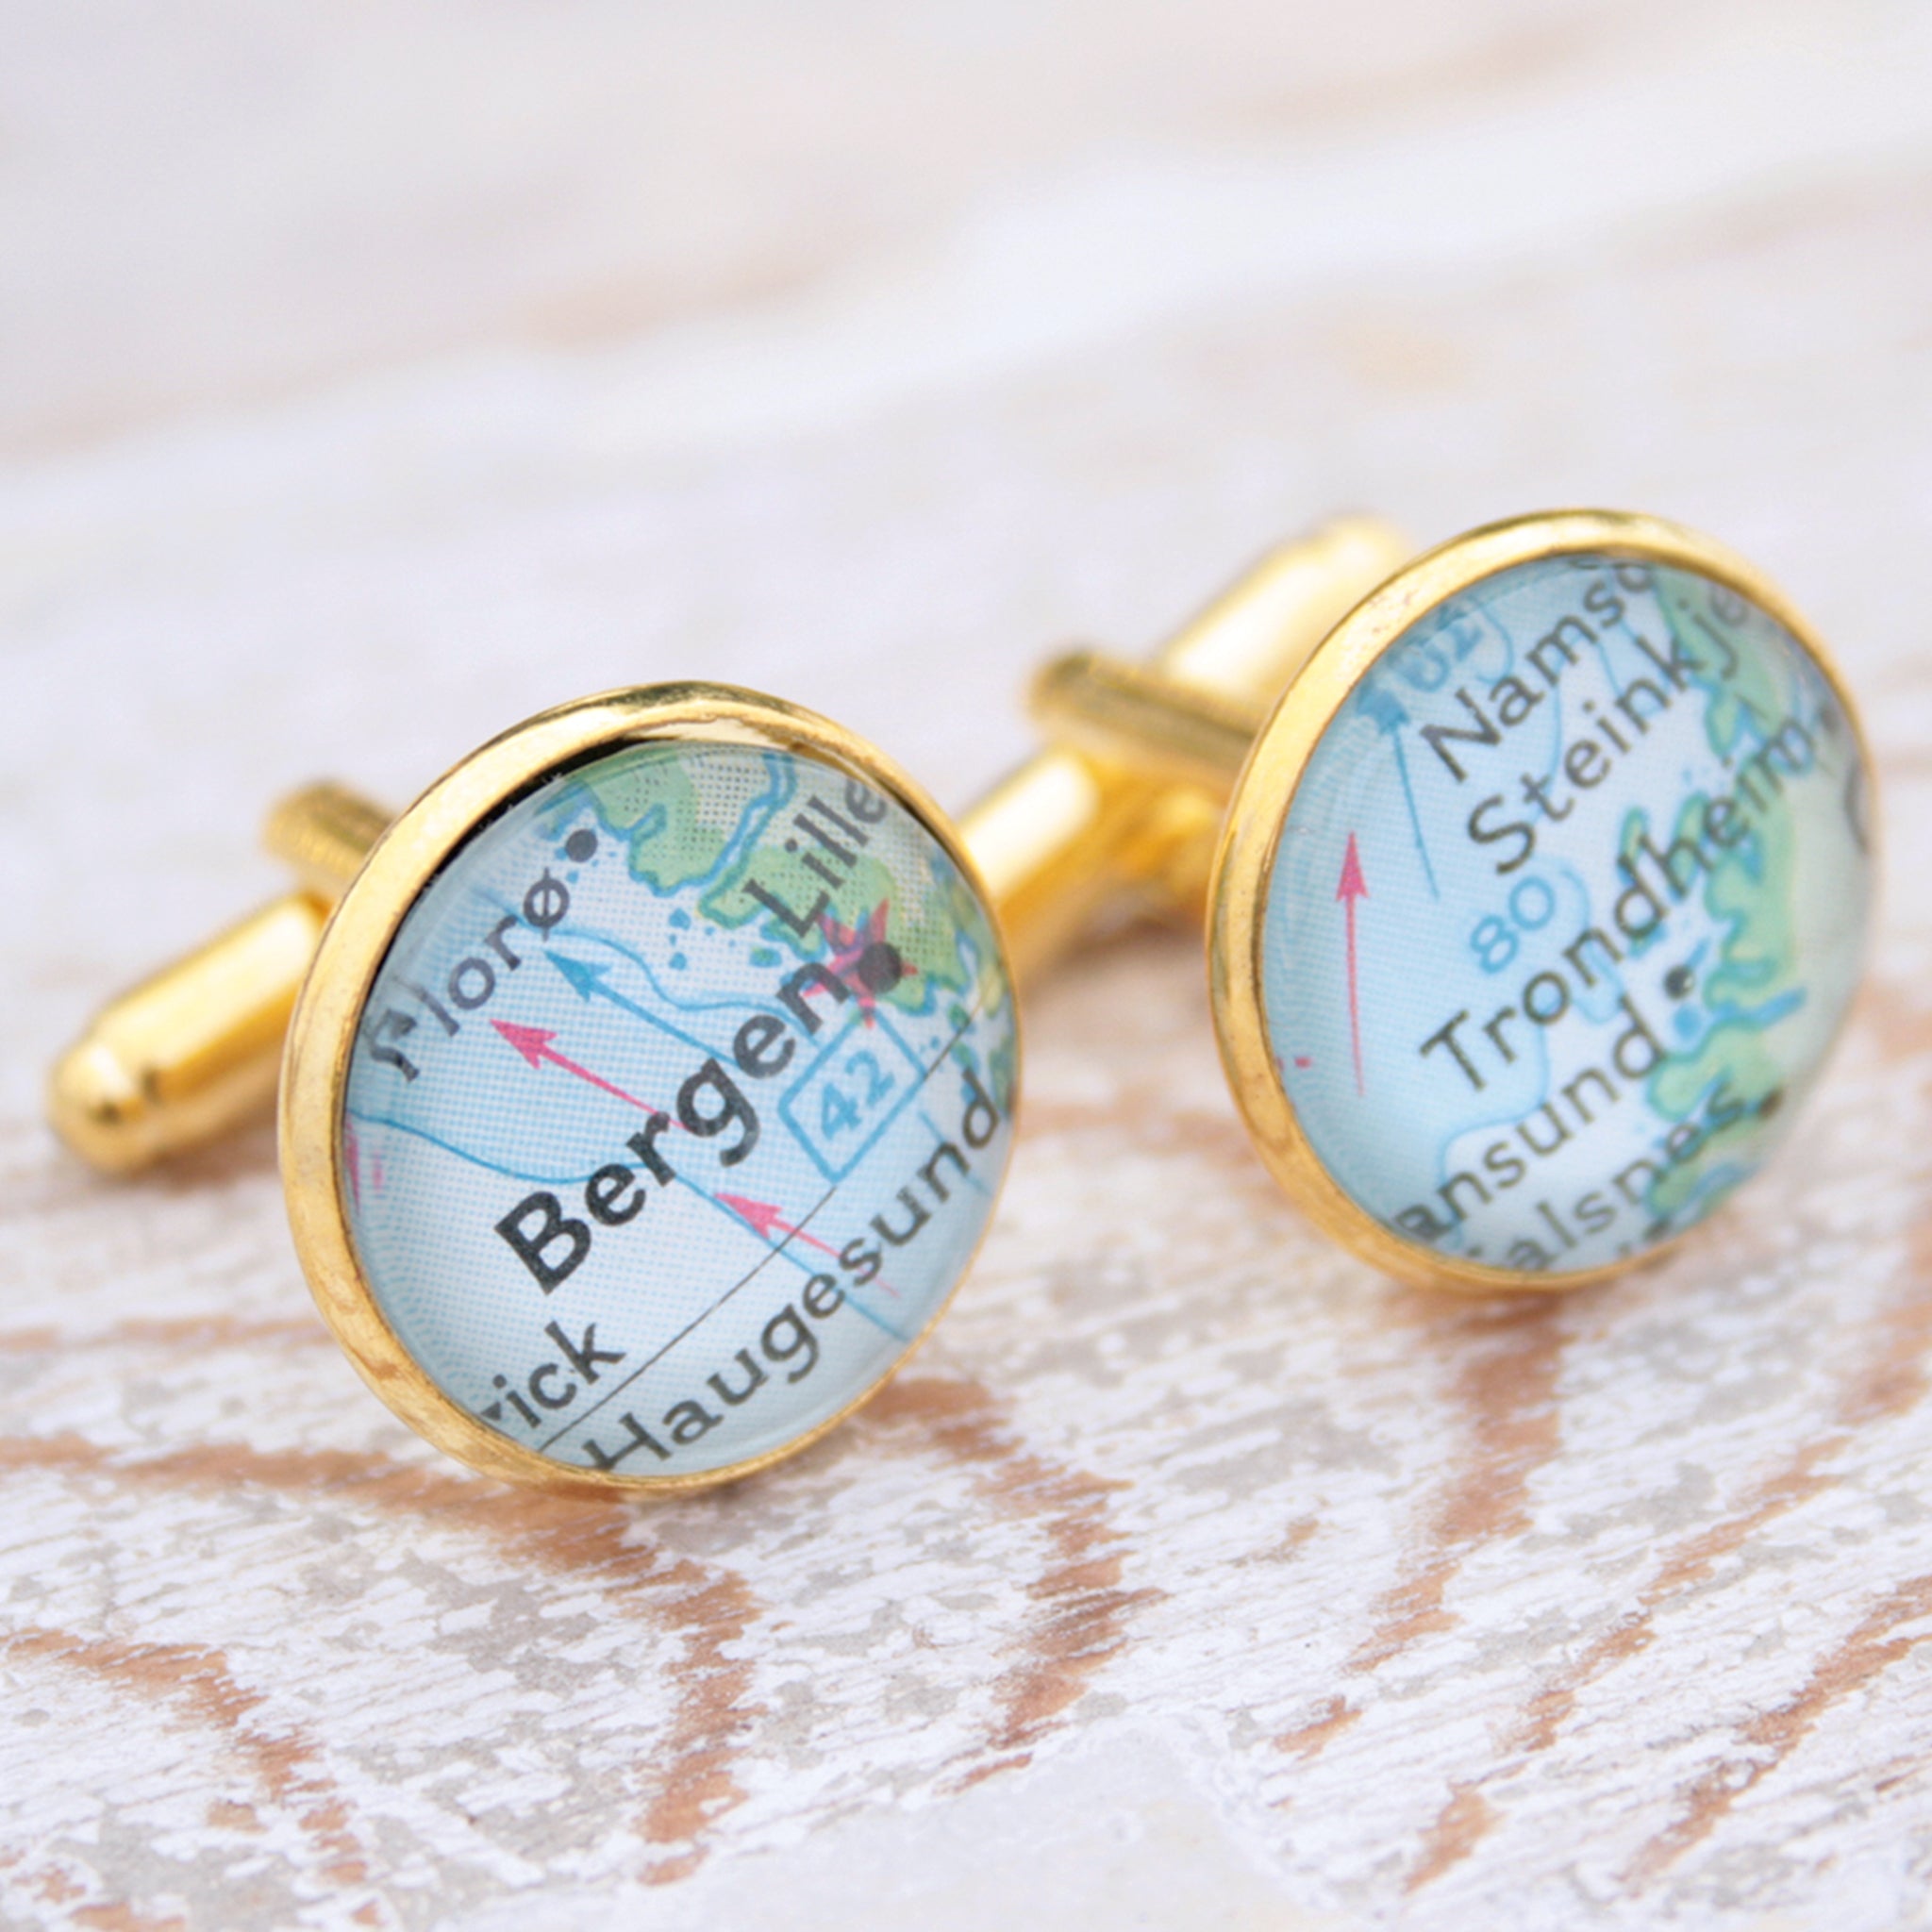 Personalised map cufflinks in gold color featuring maps of Bergen and Trondheim